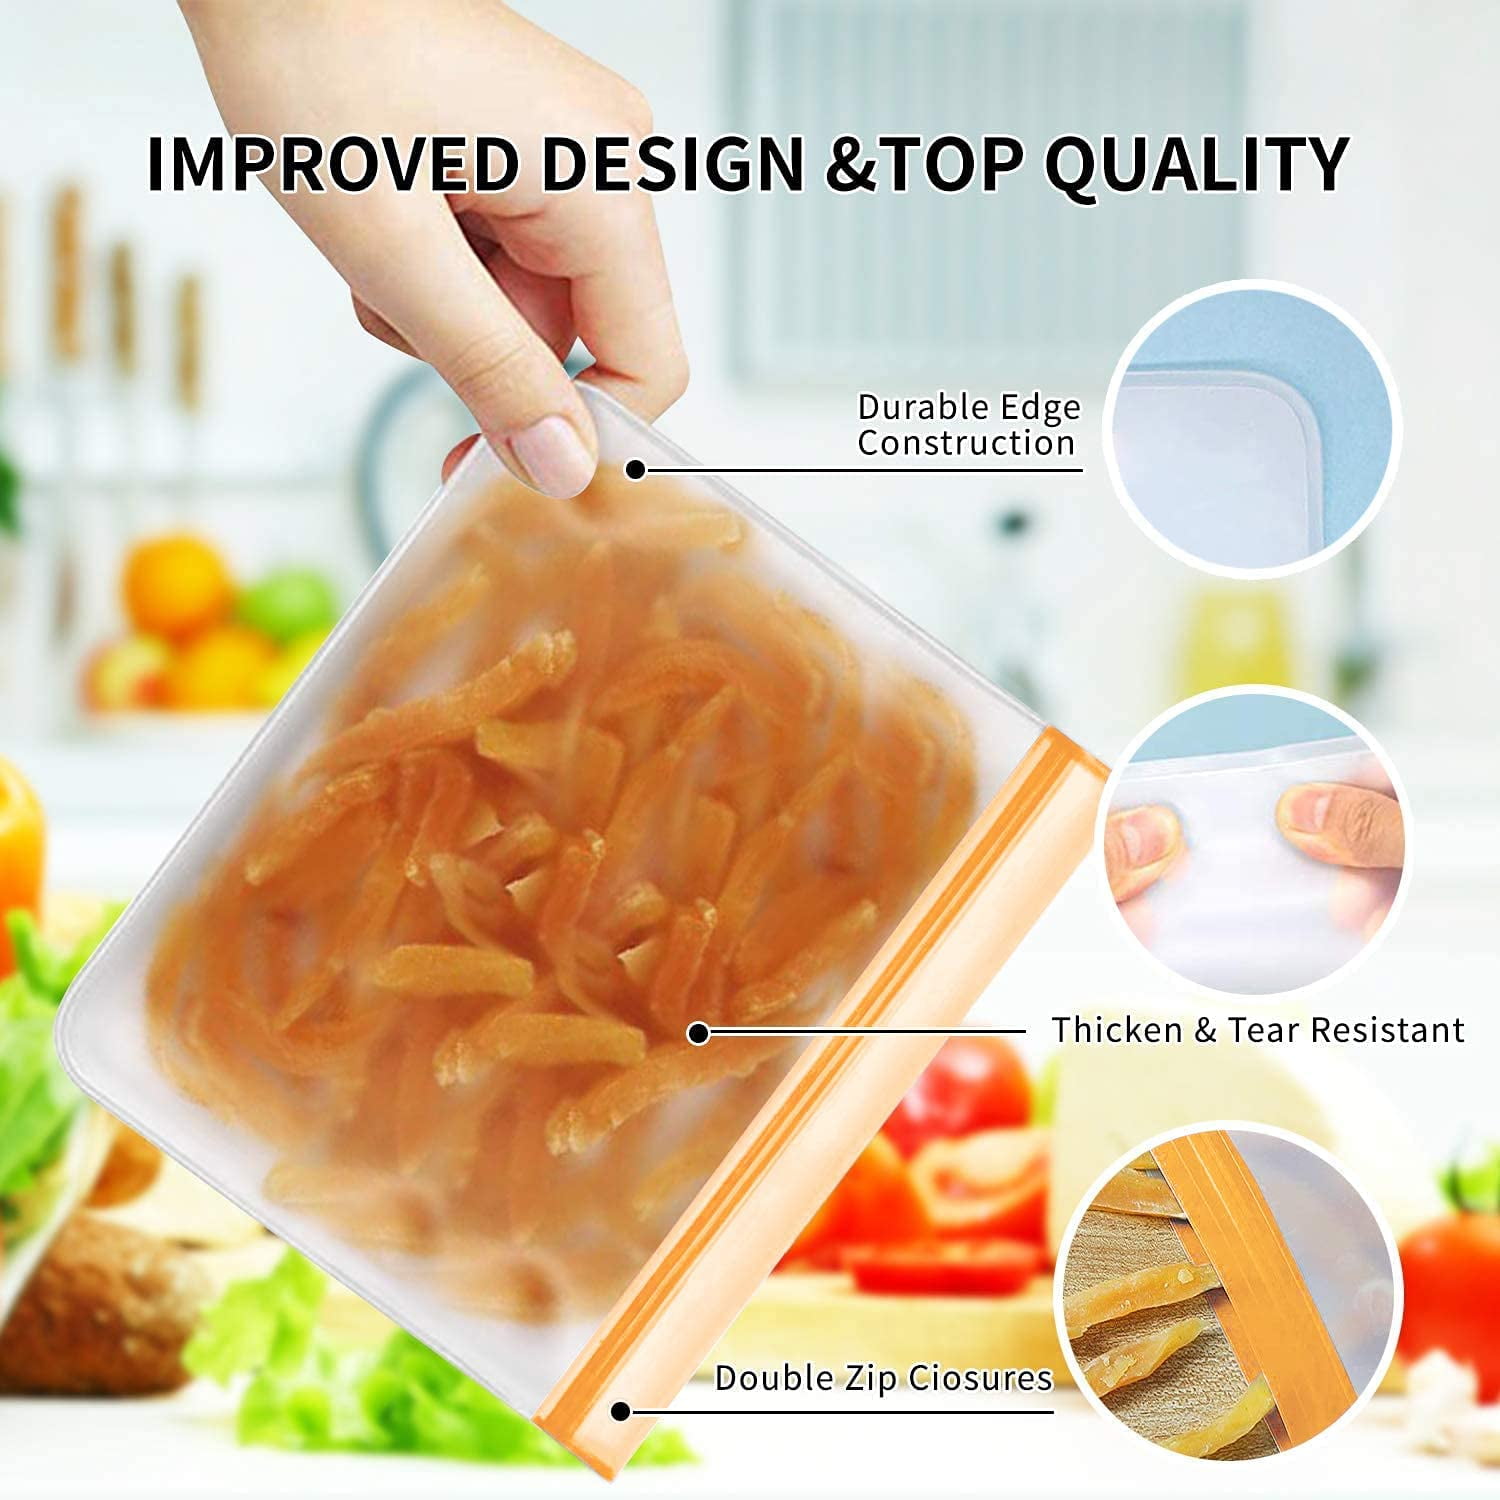 Reusable Silicone Food Storage Bags 10Pack, Marinate Food Vegetable Meat  Fruit